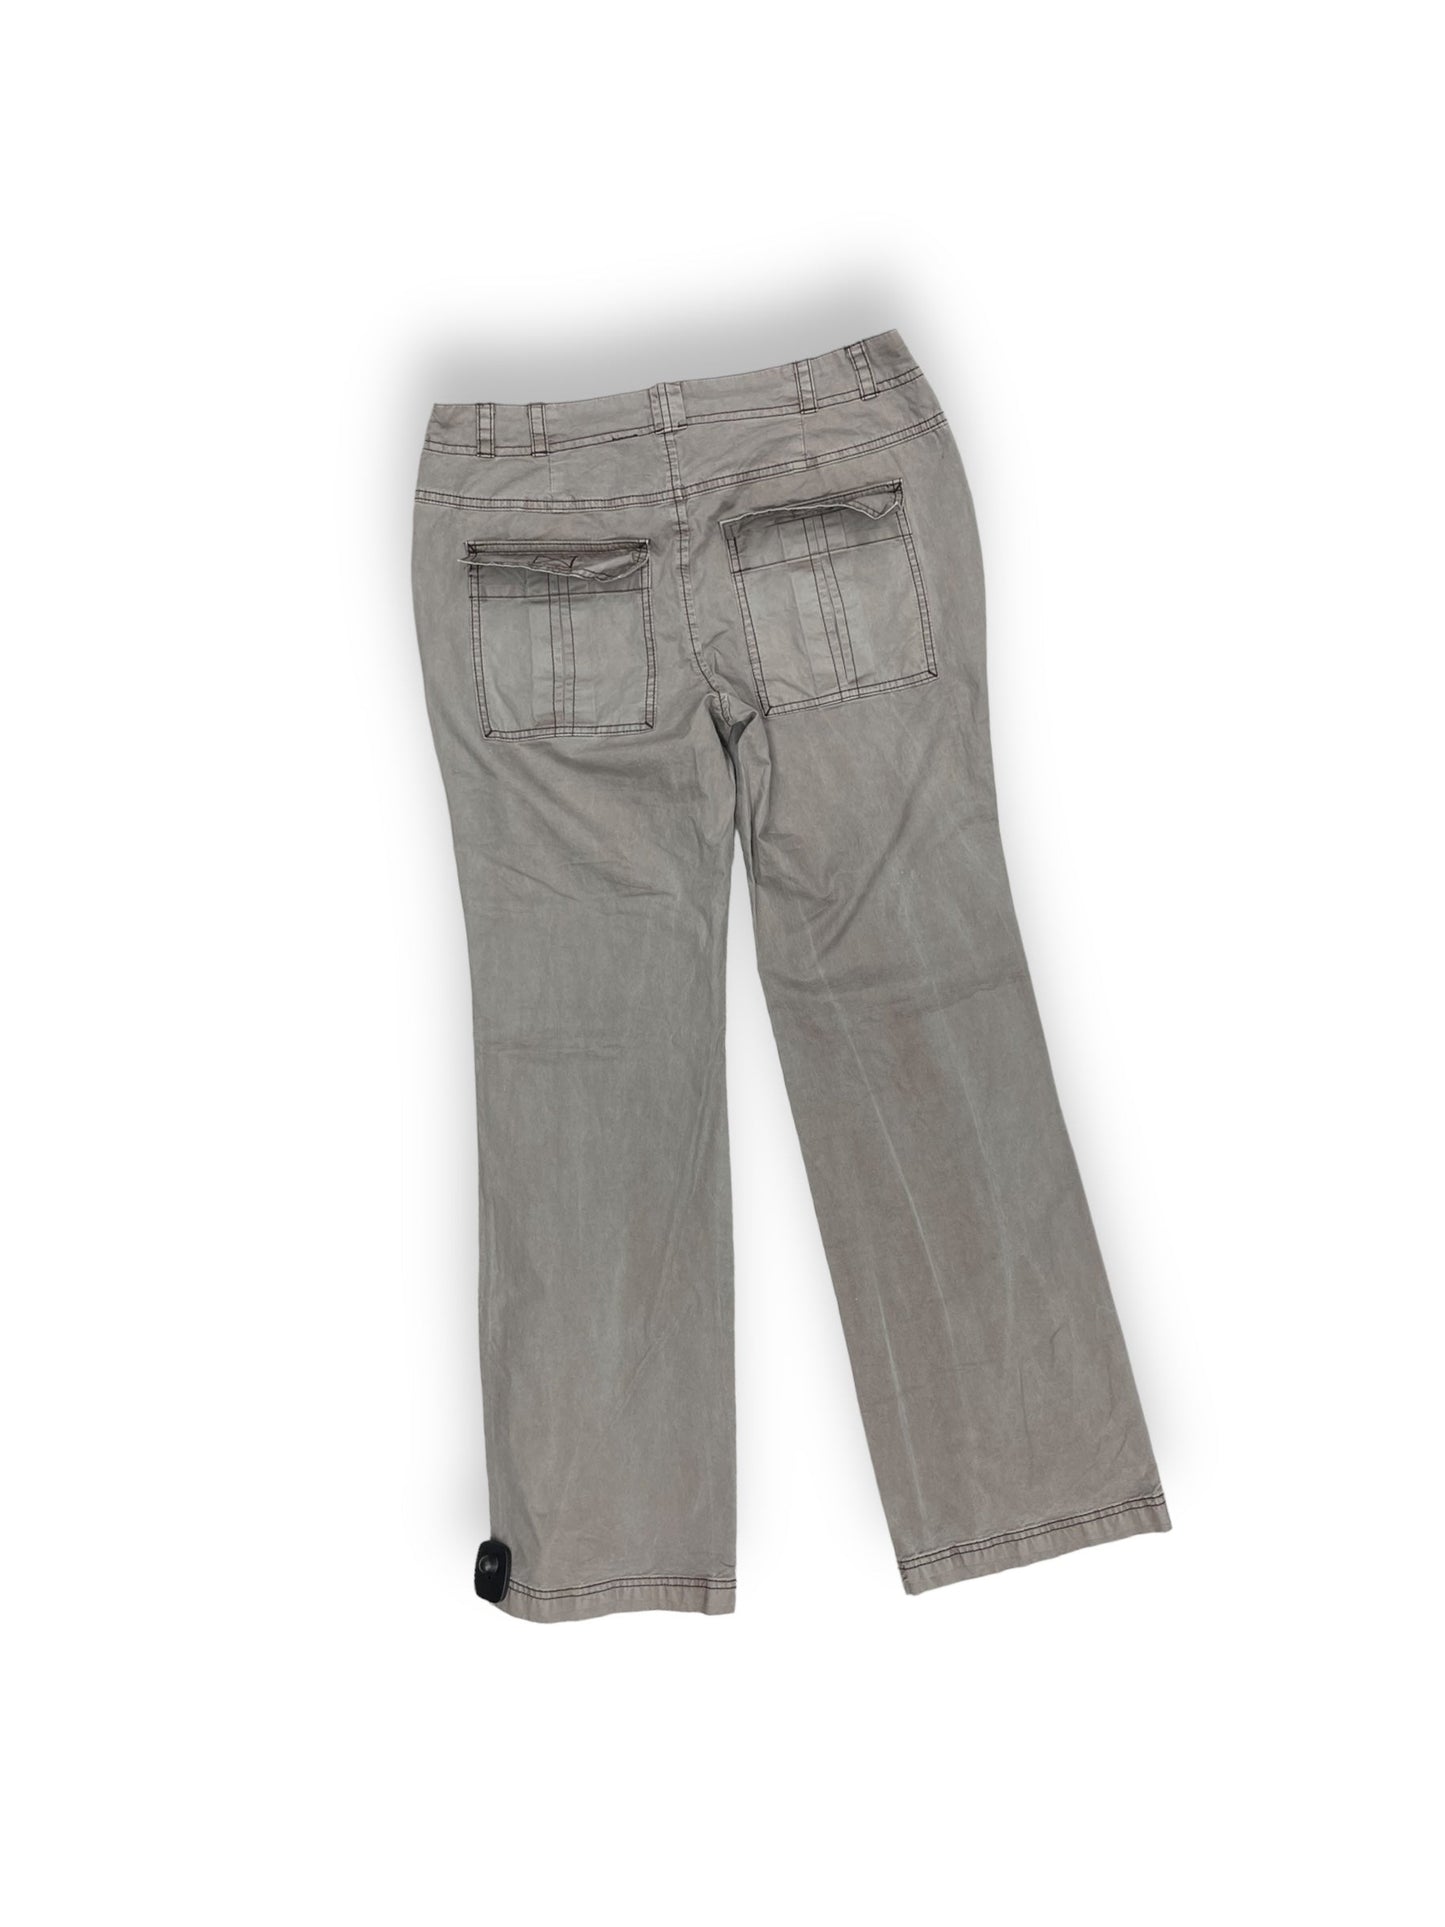 Pants Cargo & Utility By Free People  Size: 4